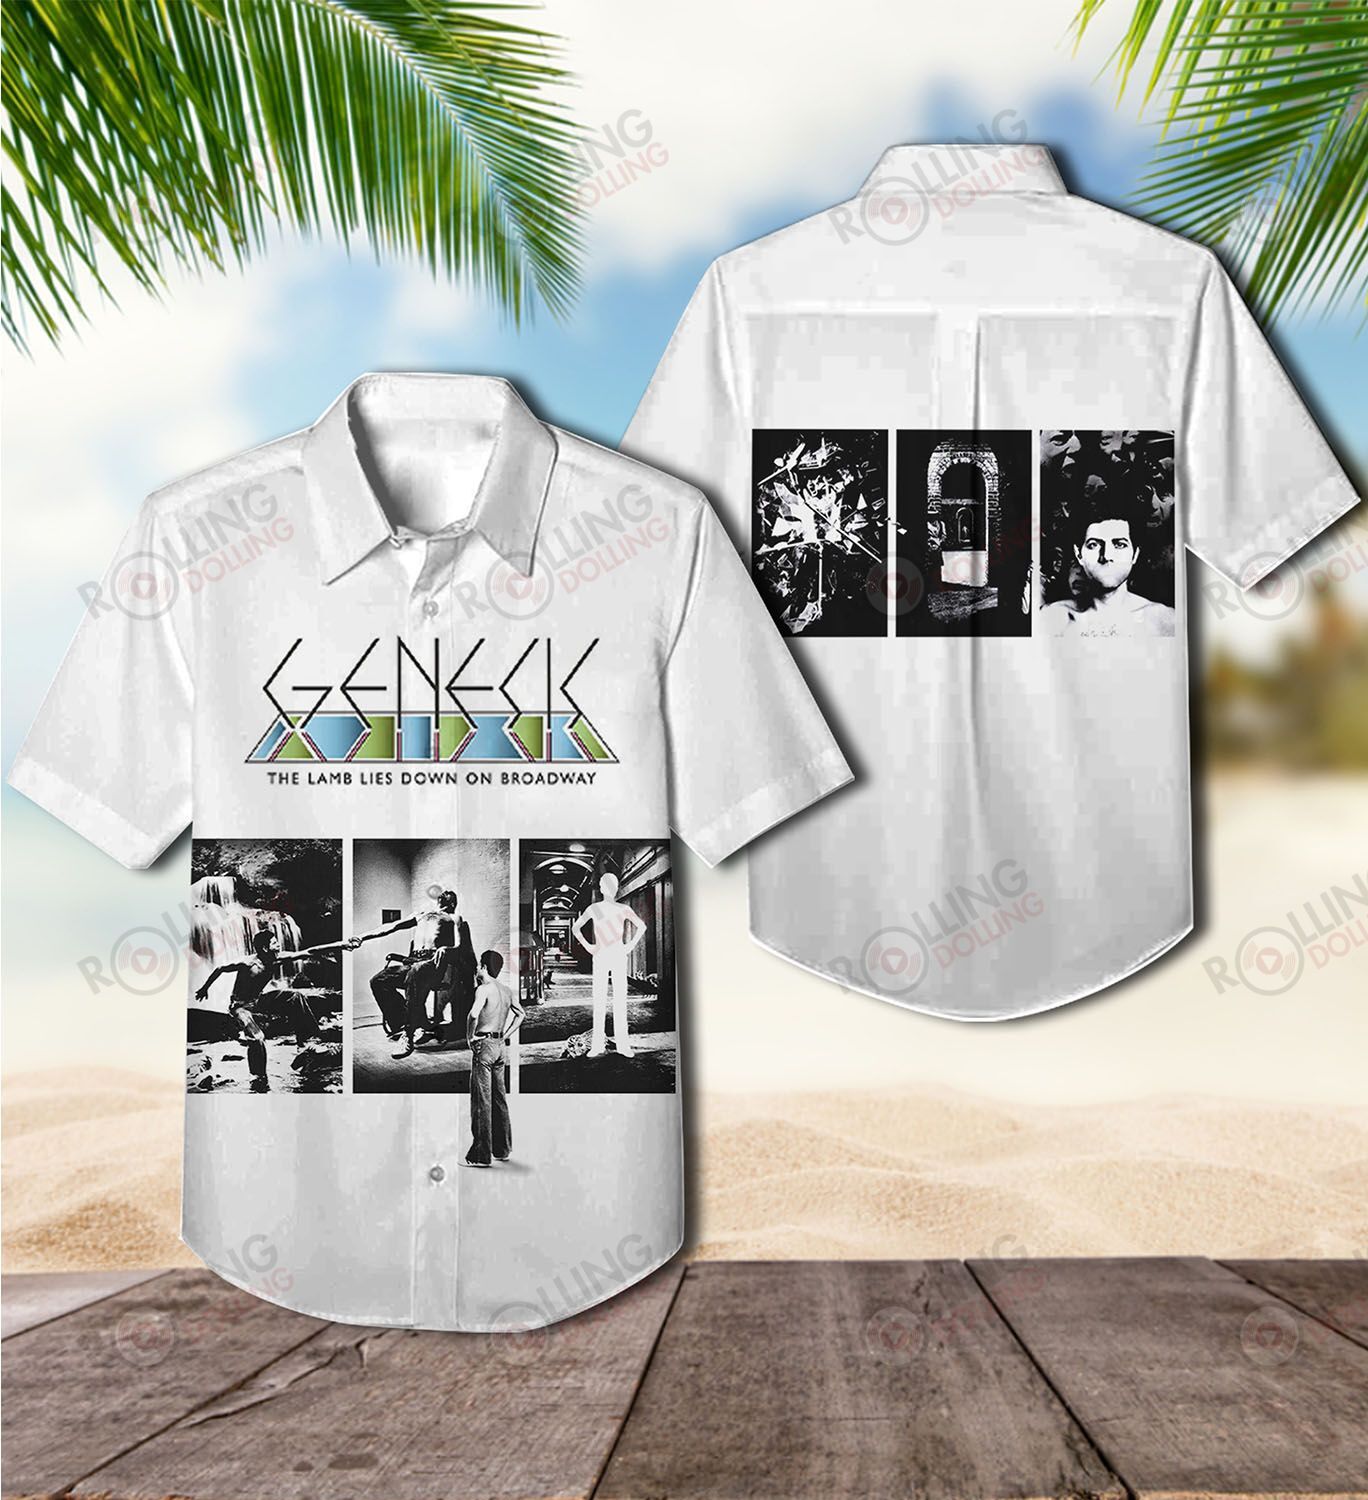 For summer, consider wearing This Amazing Hawaiian Shirt shirt in our store 199